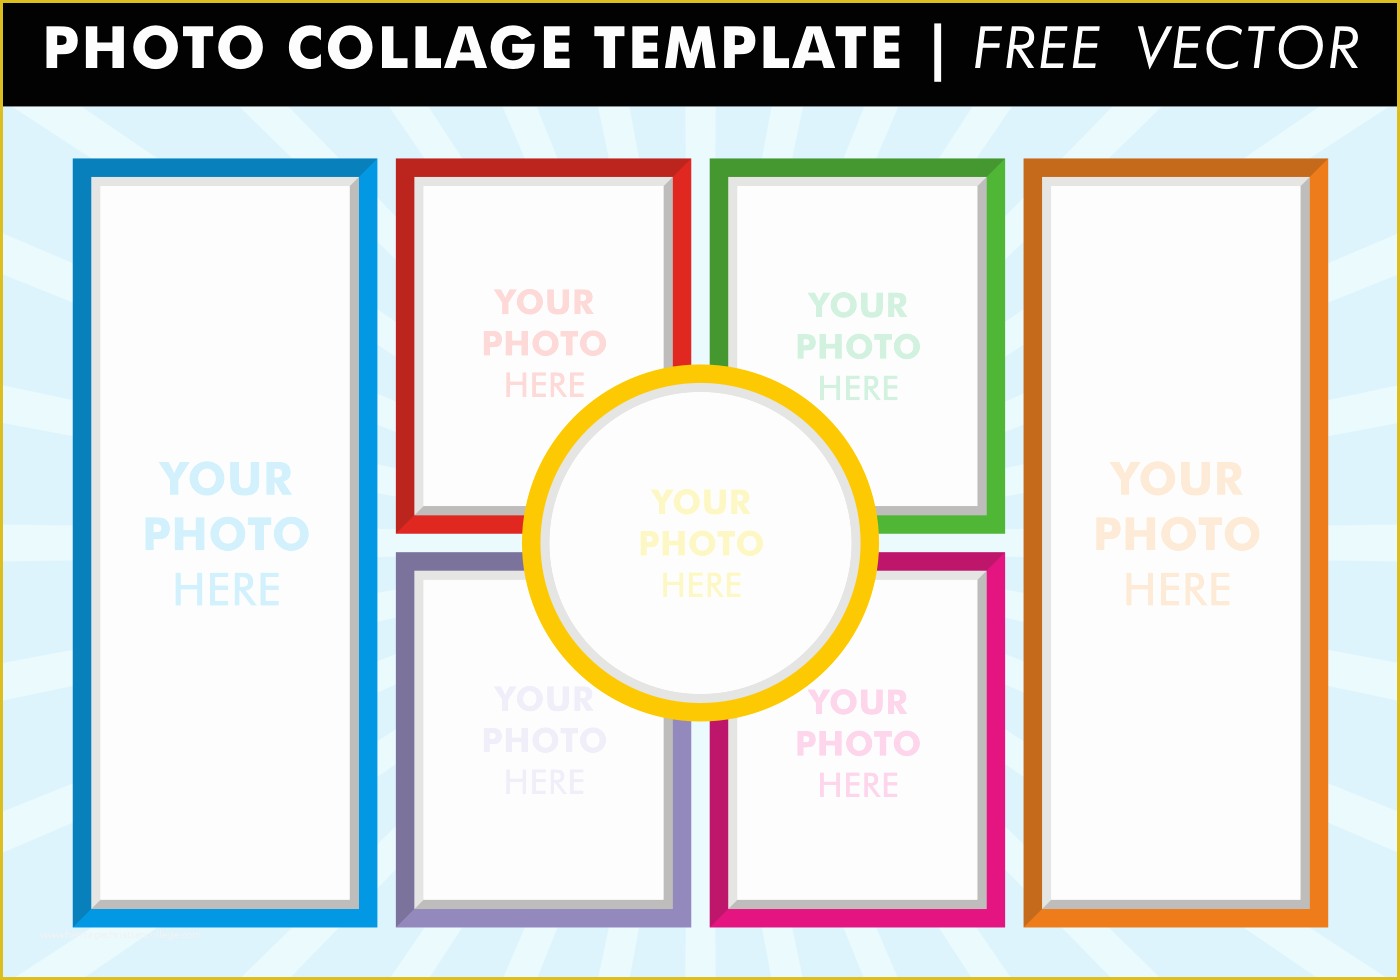 Free Photo Collage Templates Of Collage Templates Vector Download Free Vector Art